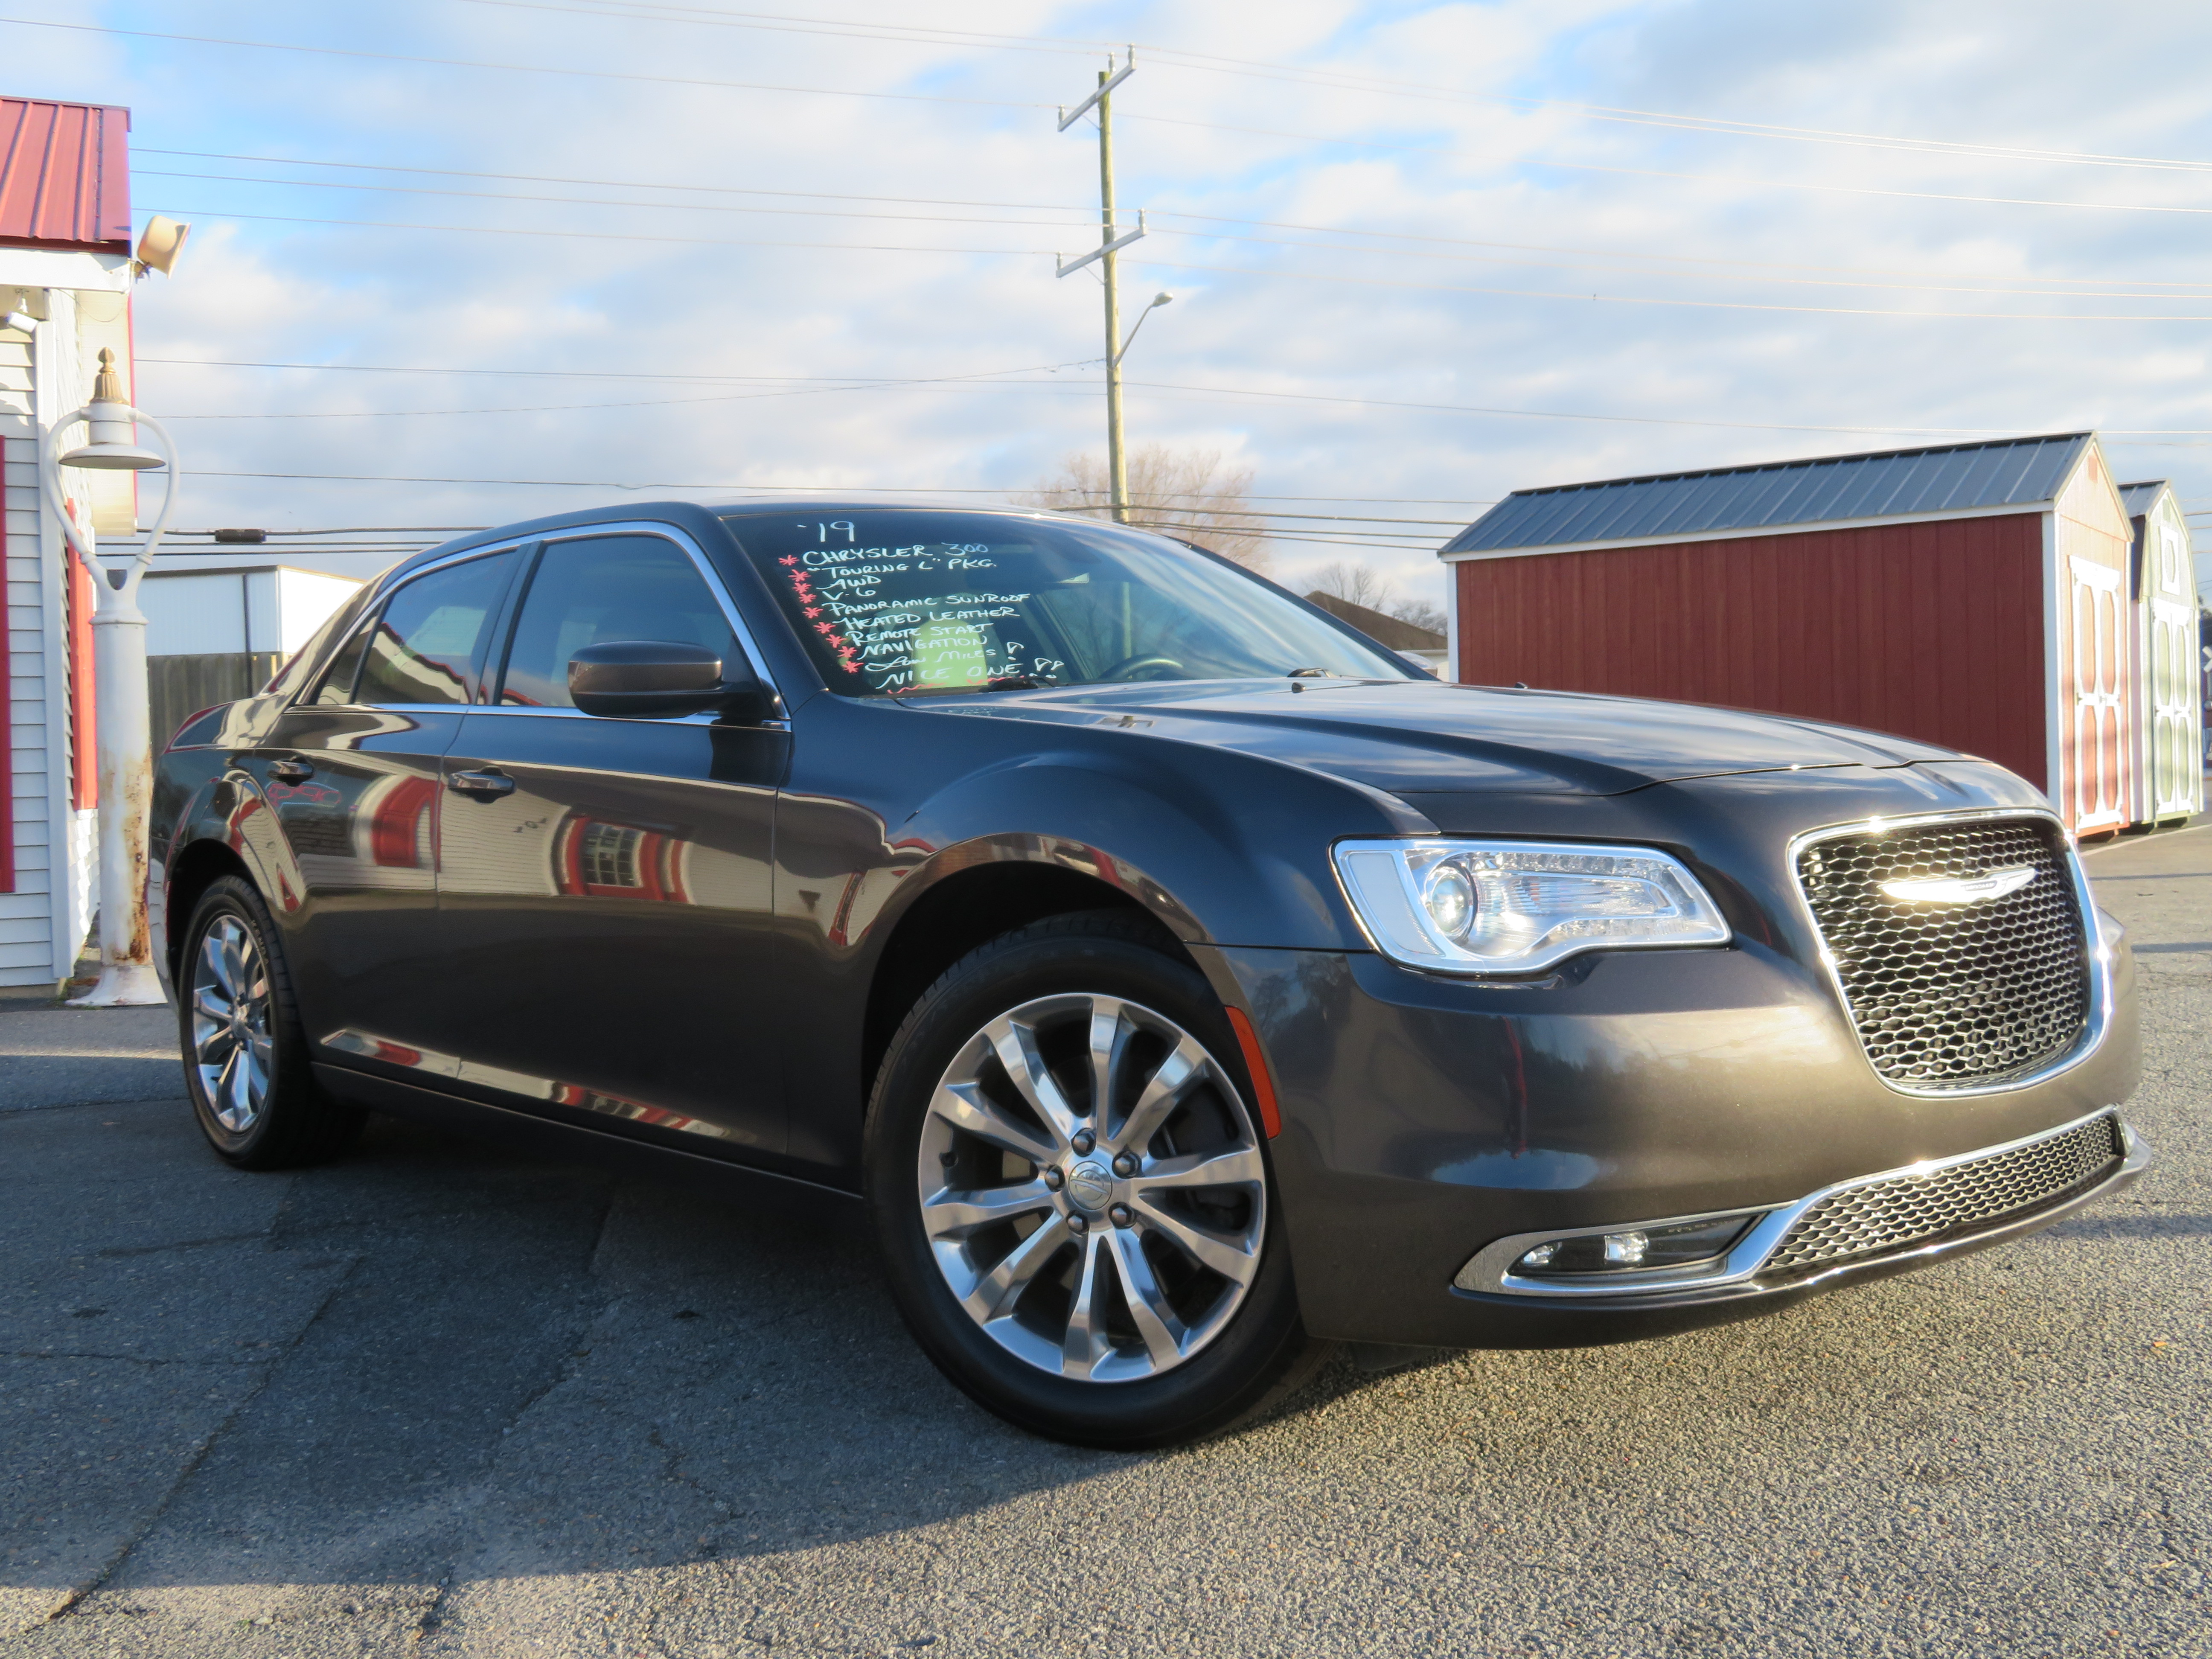 2019 Chrysler 300 Touring "L" AWD Low miles/Panoramic Sunroof